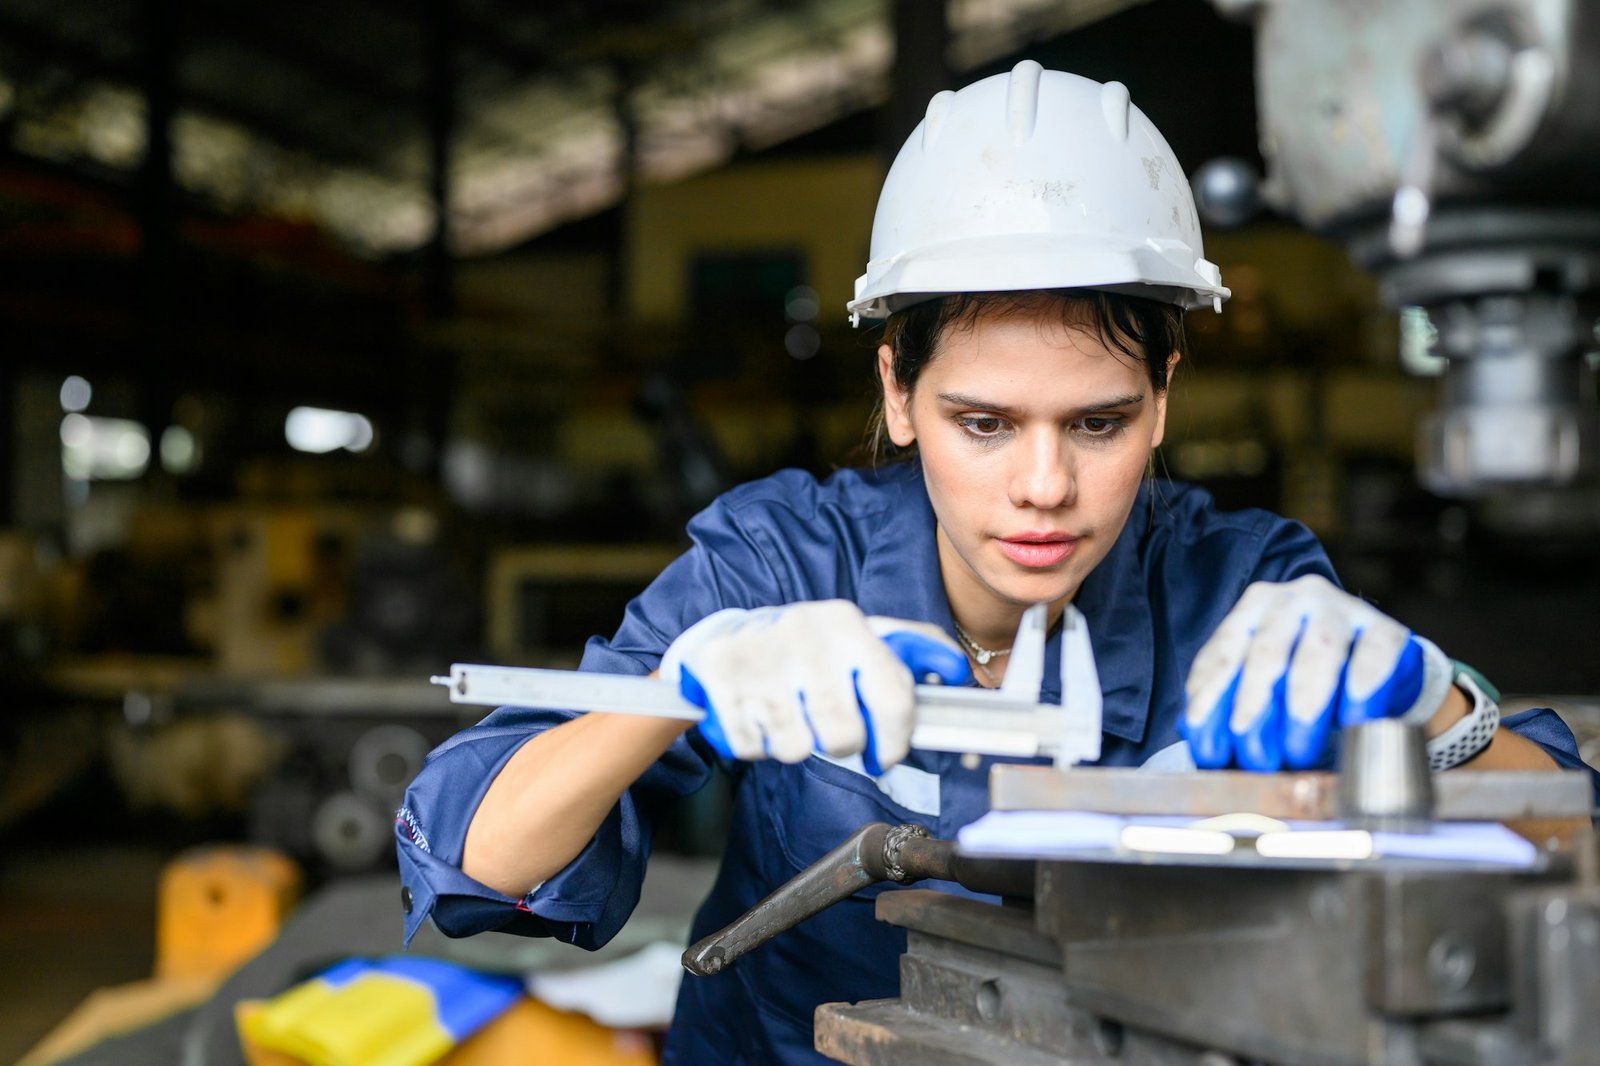 Female worker with safety hard hat working at manufacturing